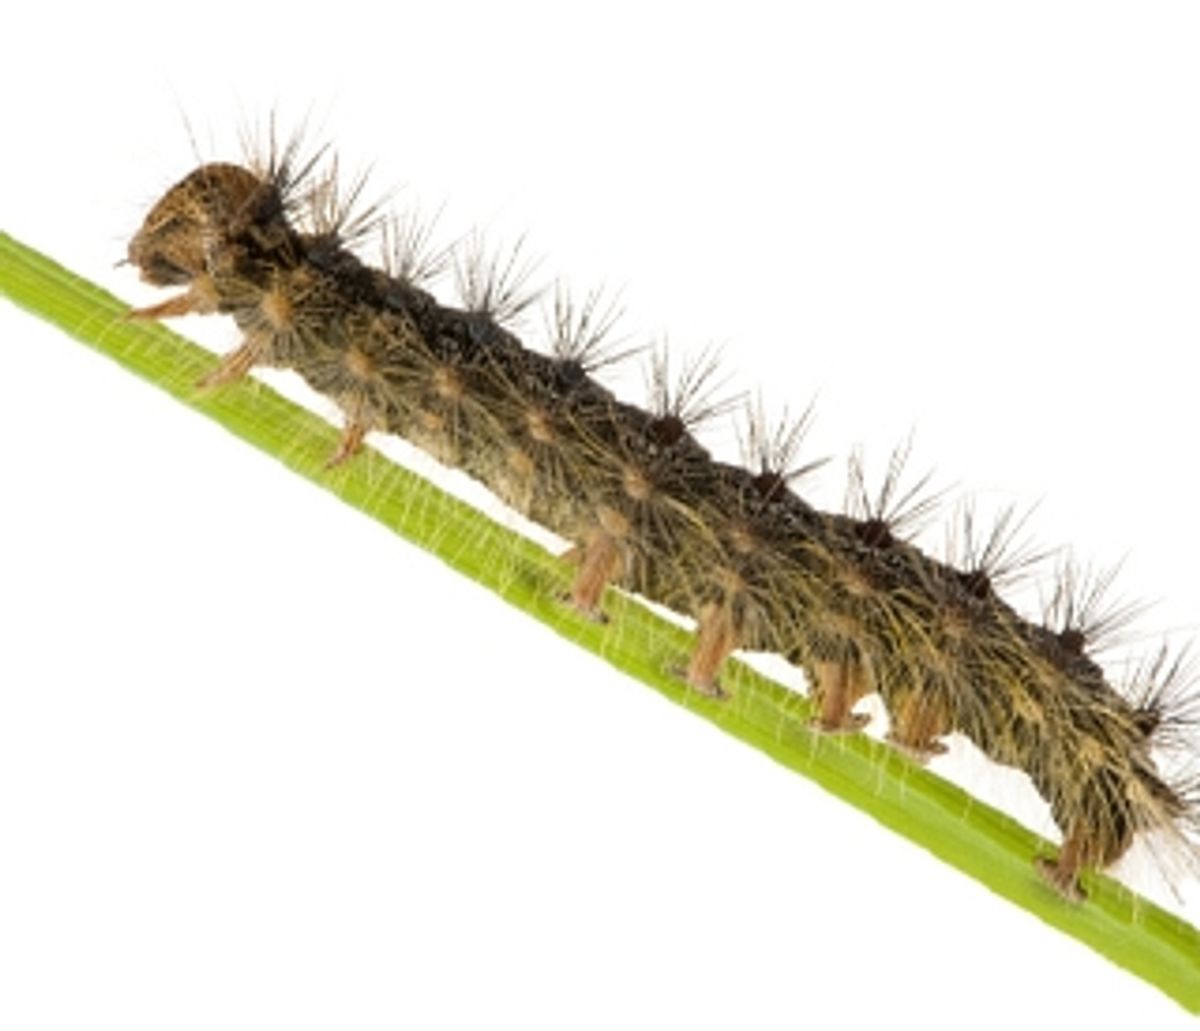 USDA Seeks Your Help to Stop Gypsy Moths